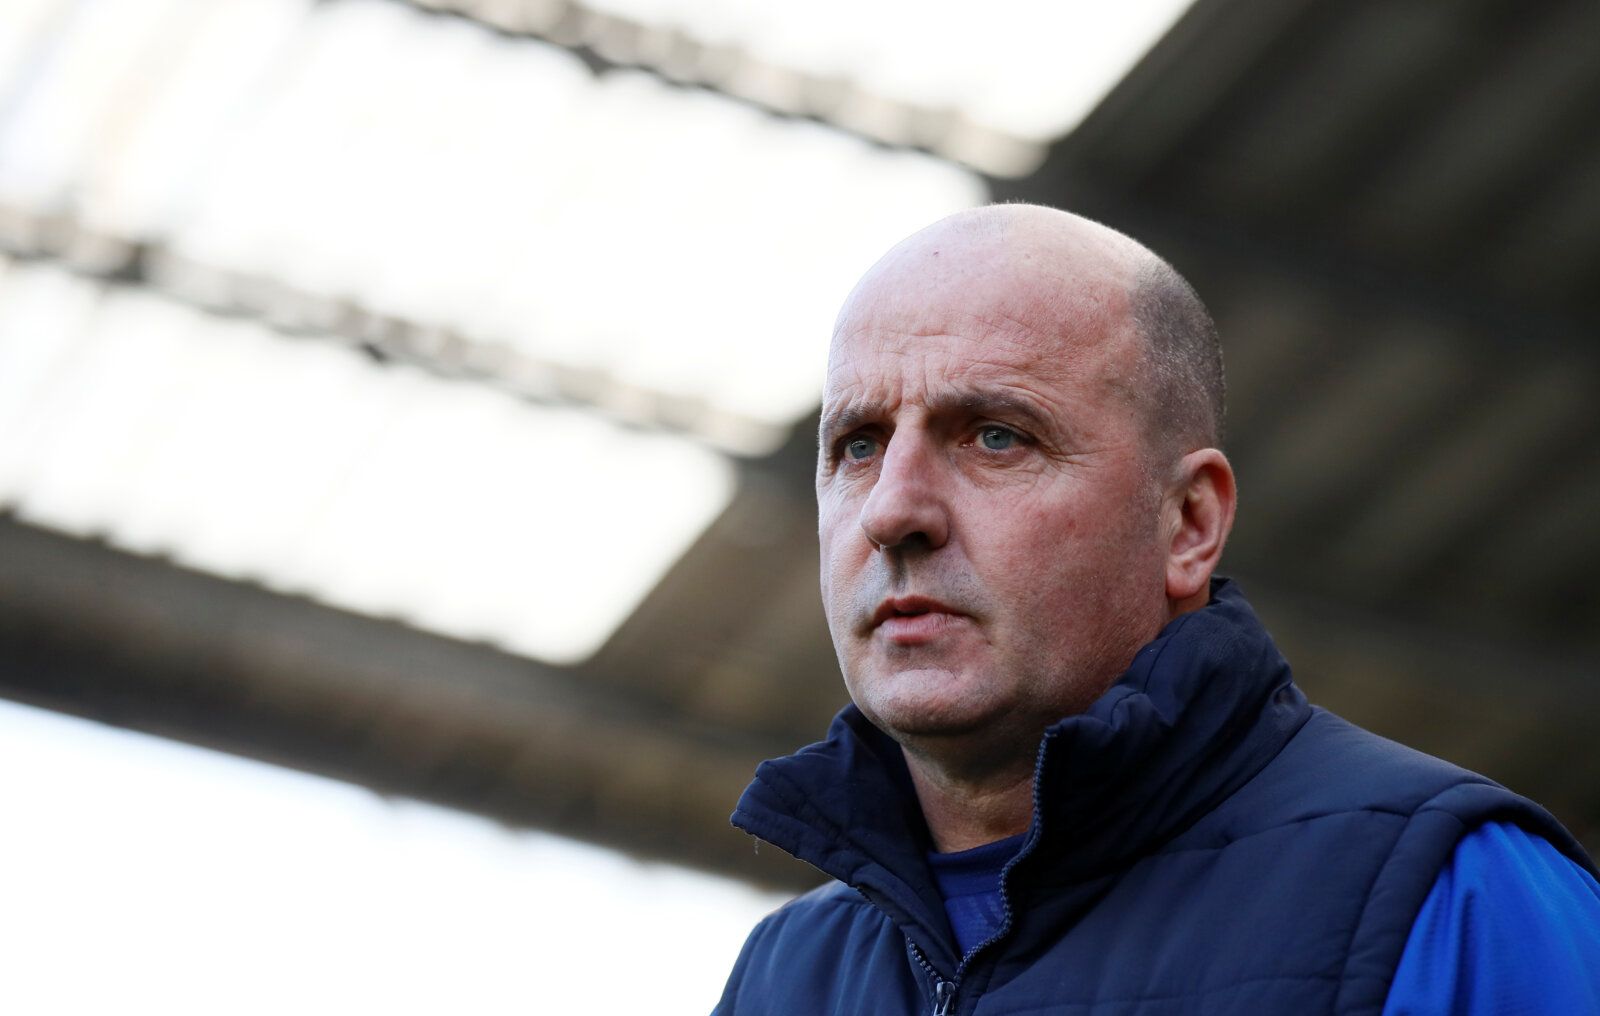 Soccer Football - Championship - Wigan Athletic v Preston North End - DW Stadium, Wigan, Britain - February 8, 2020   Wigan Athletic manager Paul Cook   Action Images/Jason Cairnduff    EDITORIAL USE ONLY. No use with unauthorized audio, video, data, fixture lists, club/league logos or 